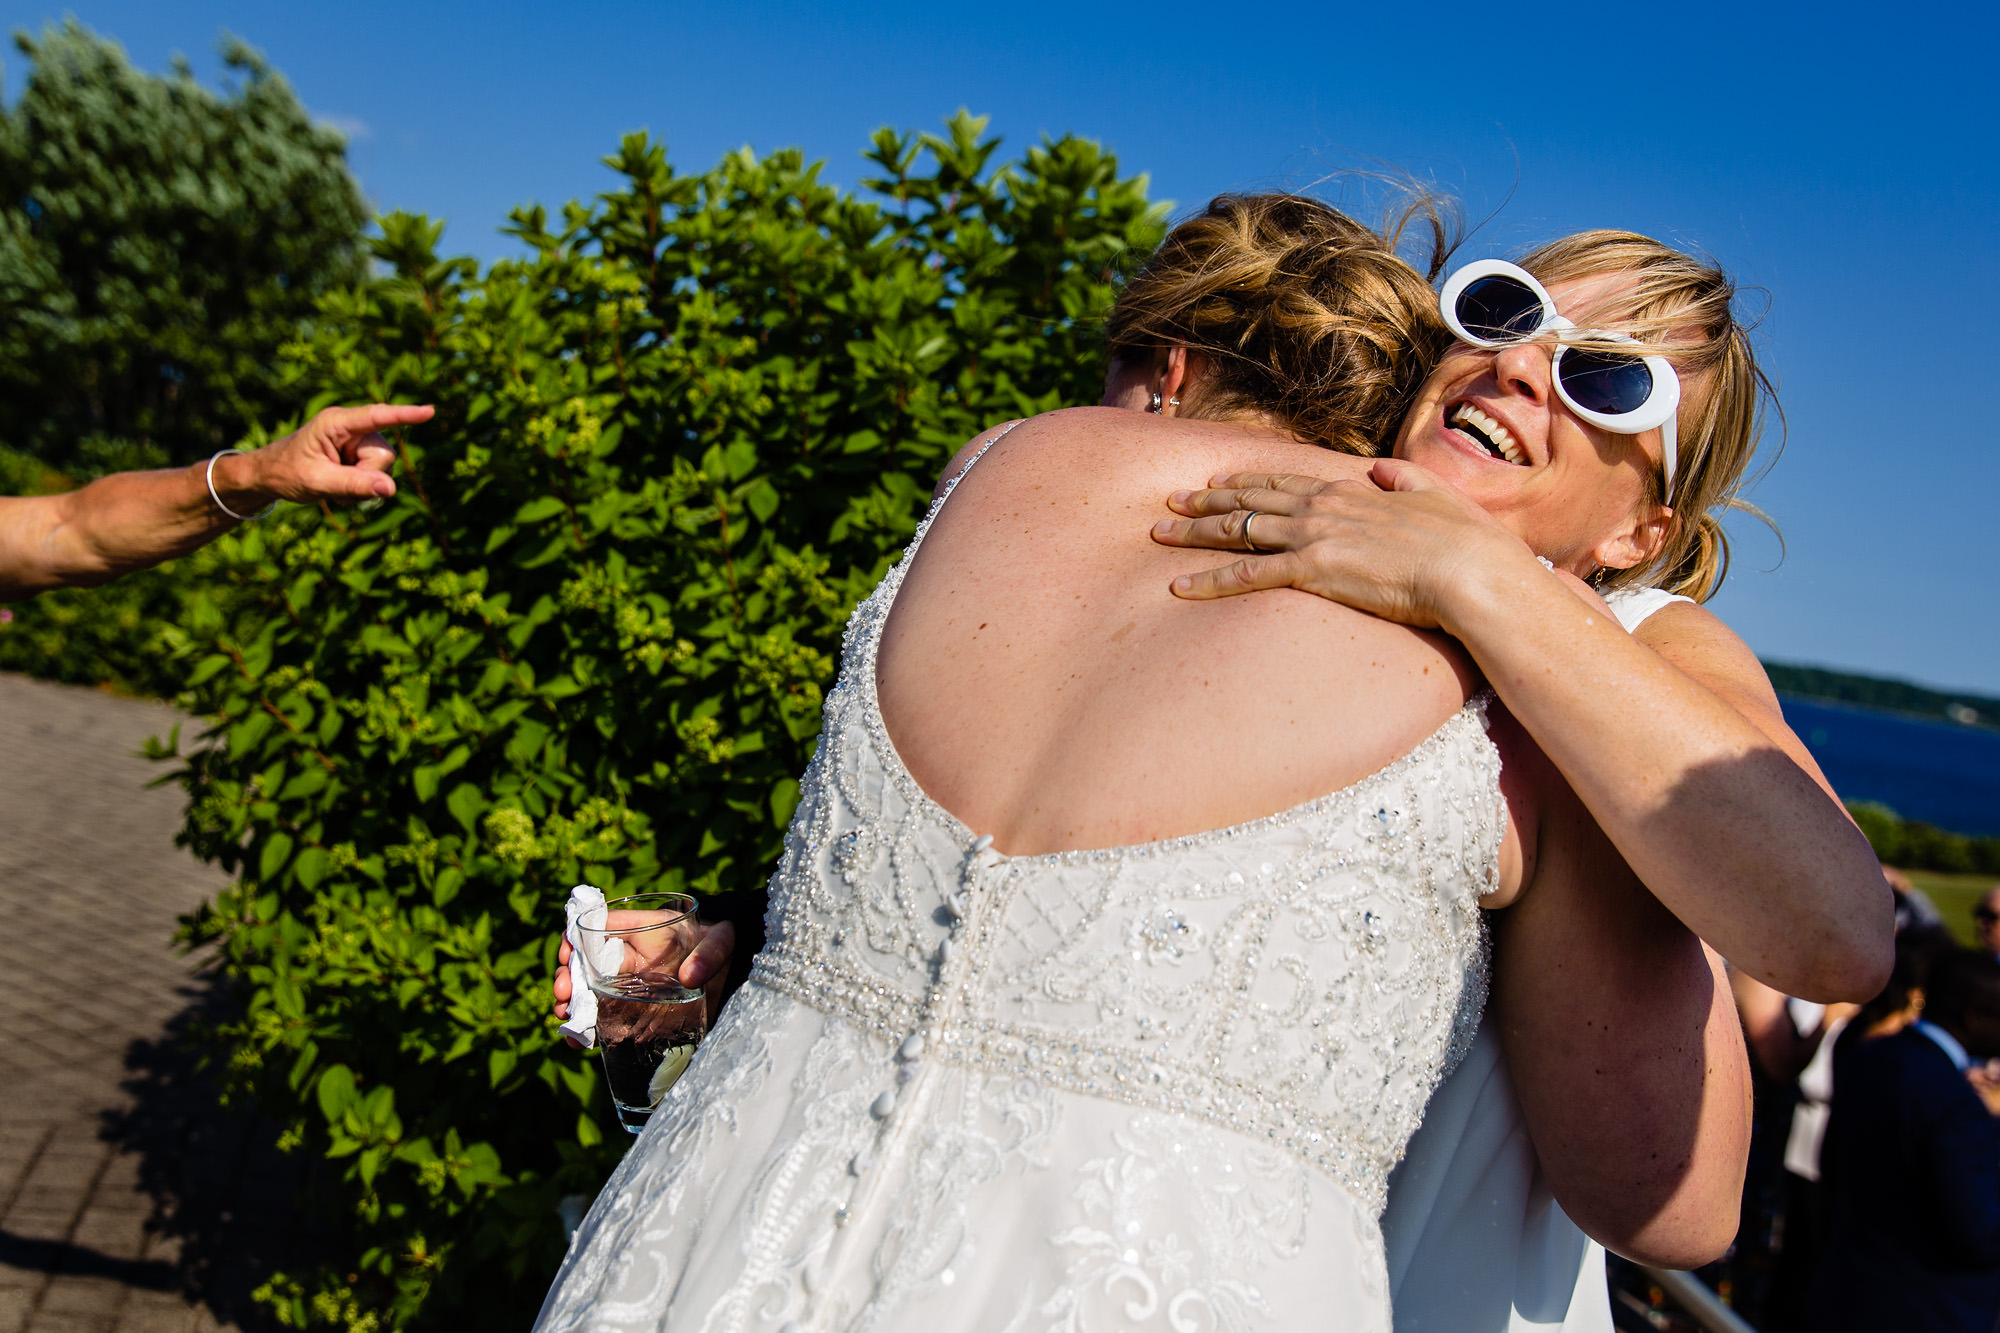 The bride hugs a friend at a wedding in Maine